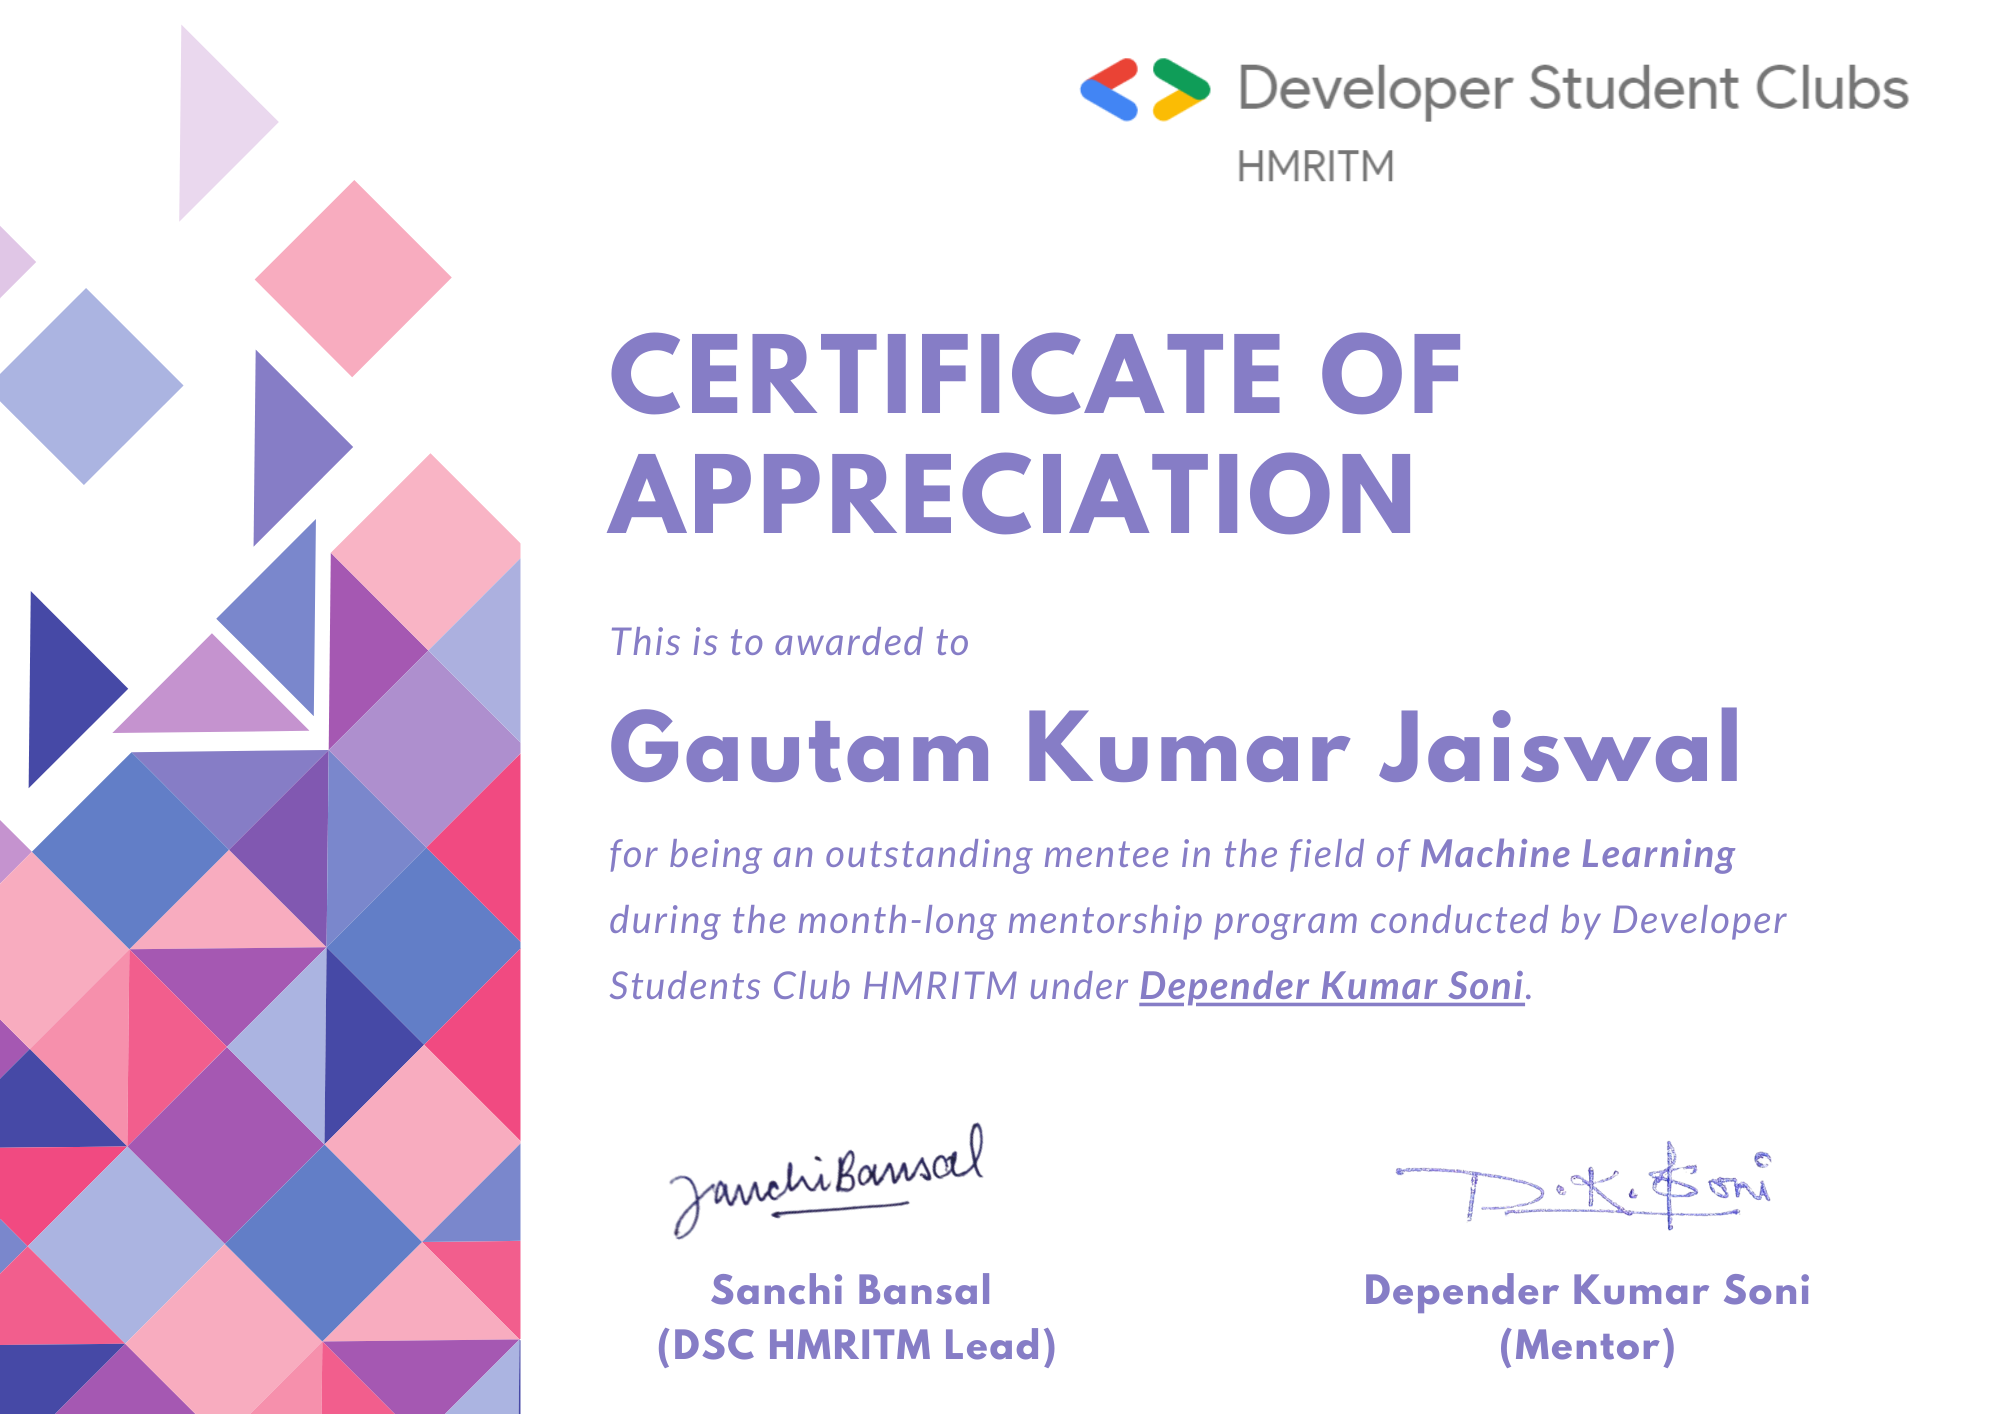 Completed DSC HMRITM Machine Learning Mentee Program 